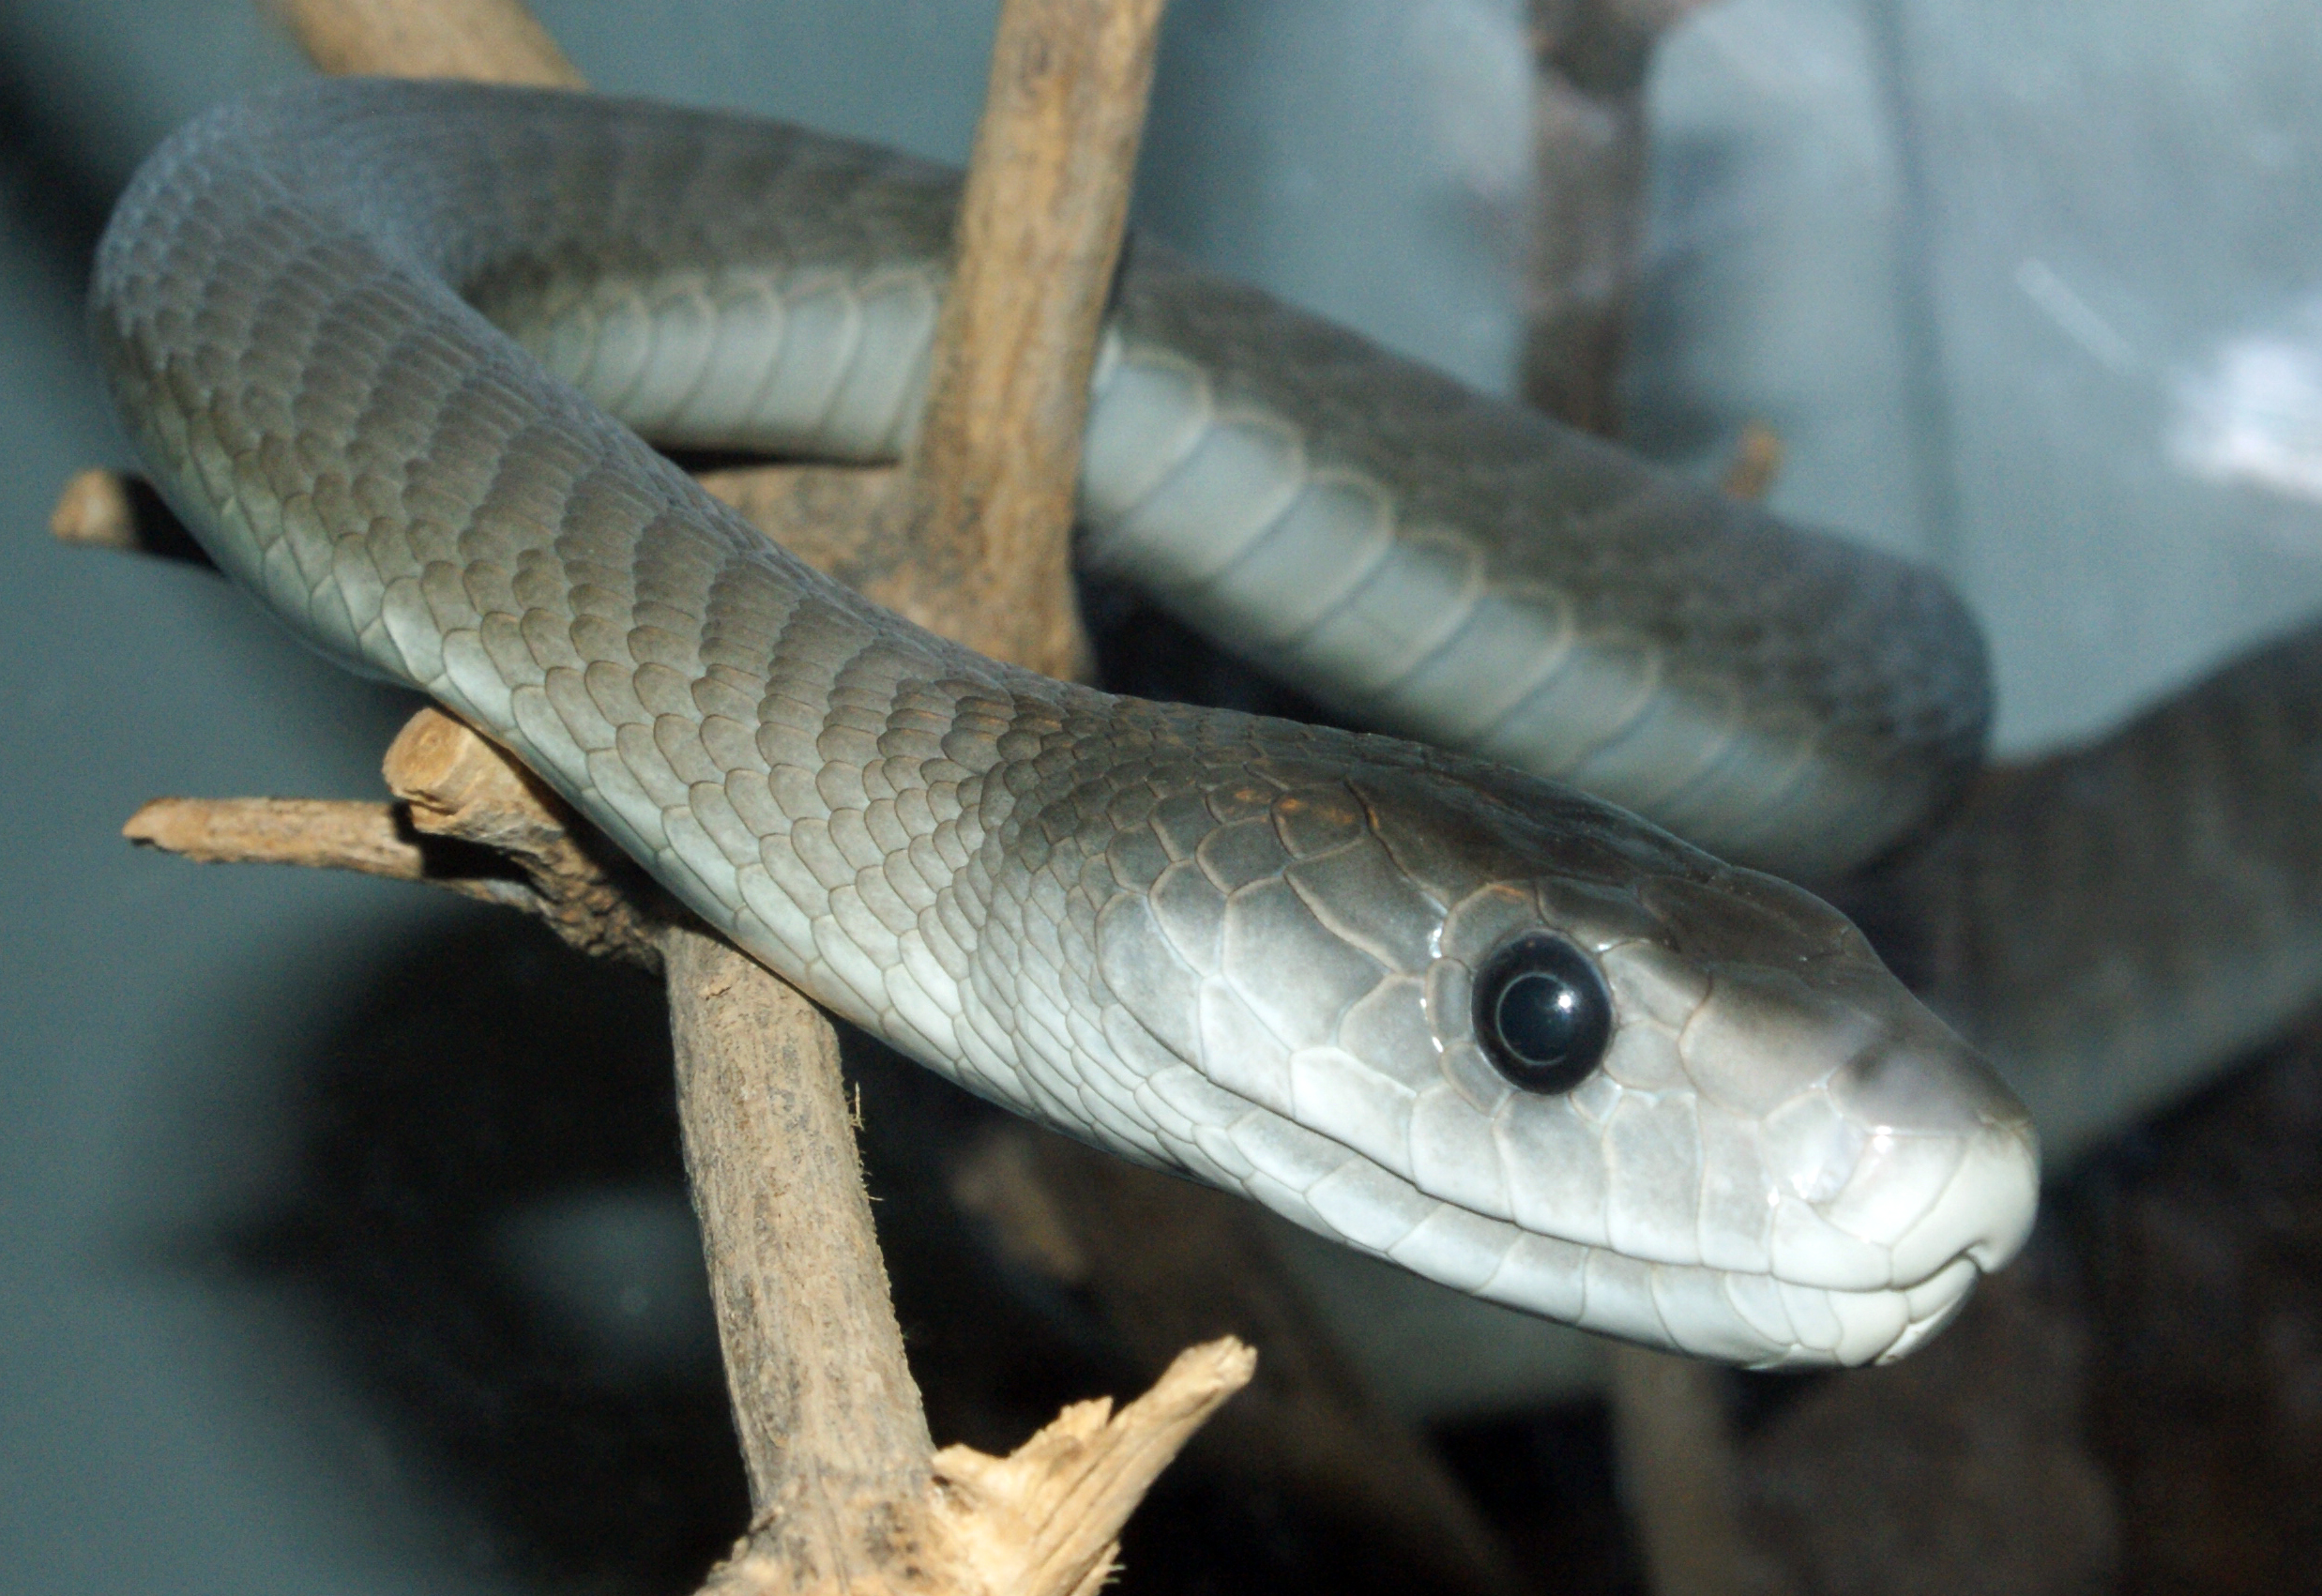 The 10 Deadliest Snakes in the World Image